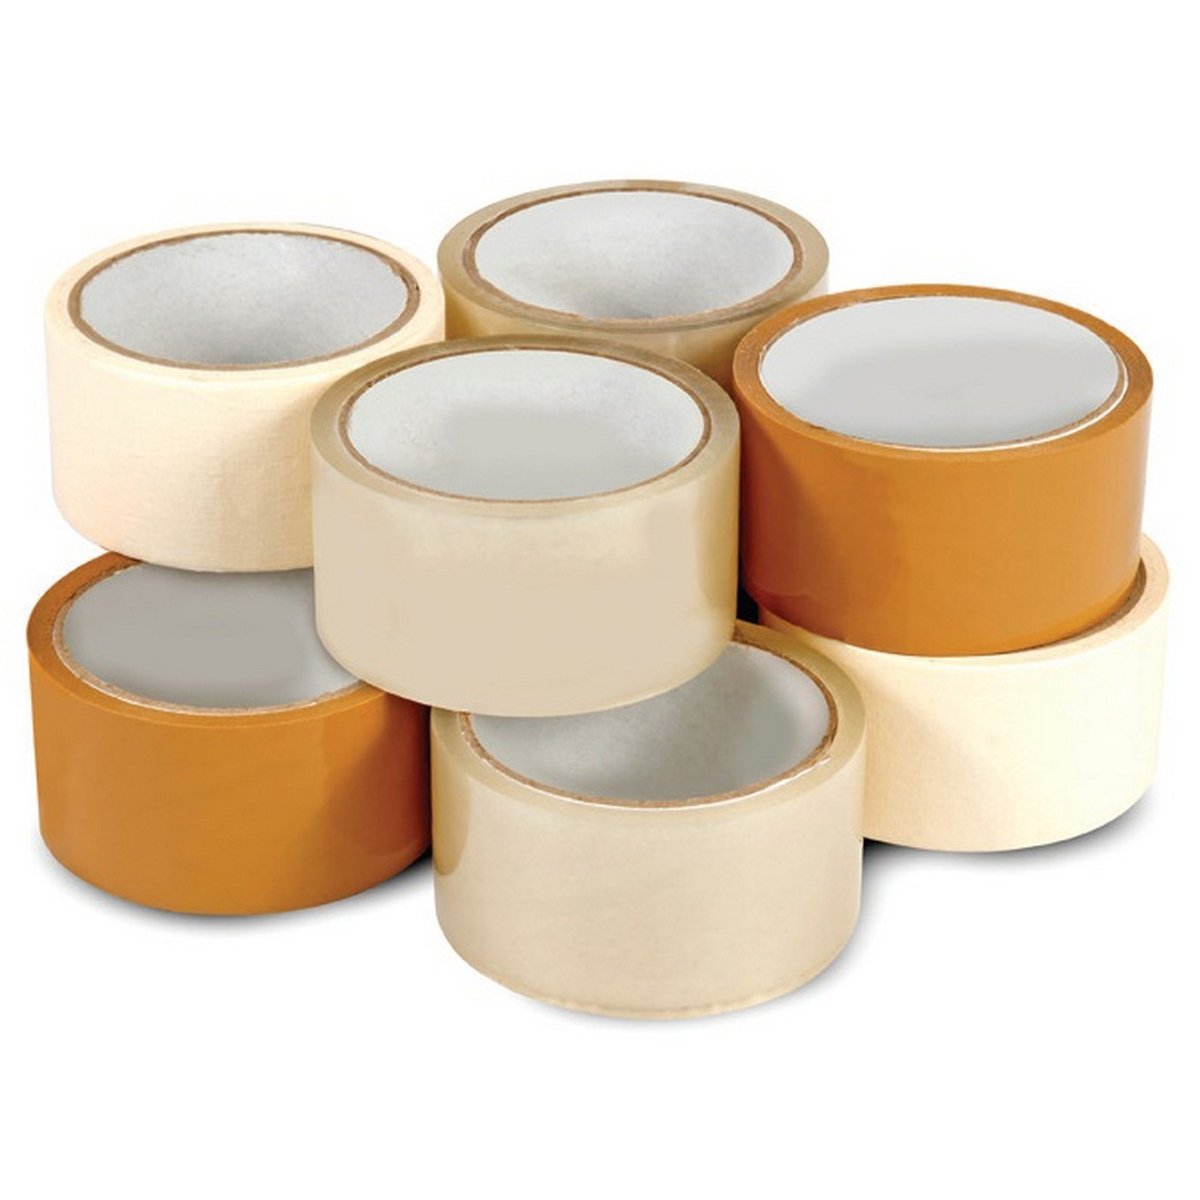 Packing Tape Clear 4 Piece+ Brown 4Piece+Masking Tape 2Piece